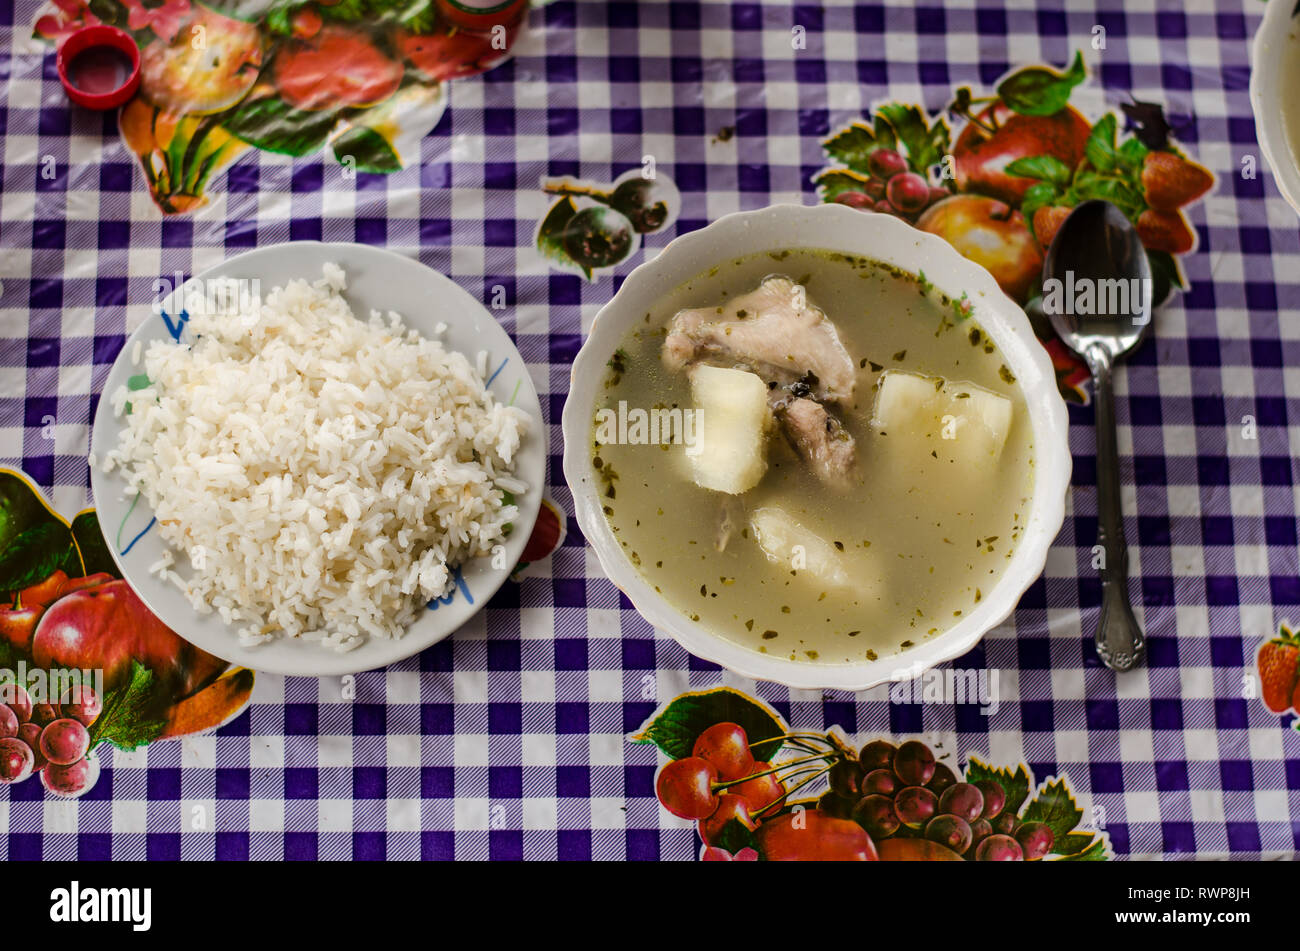 Traditional Panamanian food known as "Sancocho" or chicken soup accompanied with "arroz blanco"  or white rice, served as usual. Stock Photo